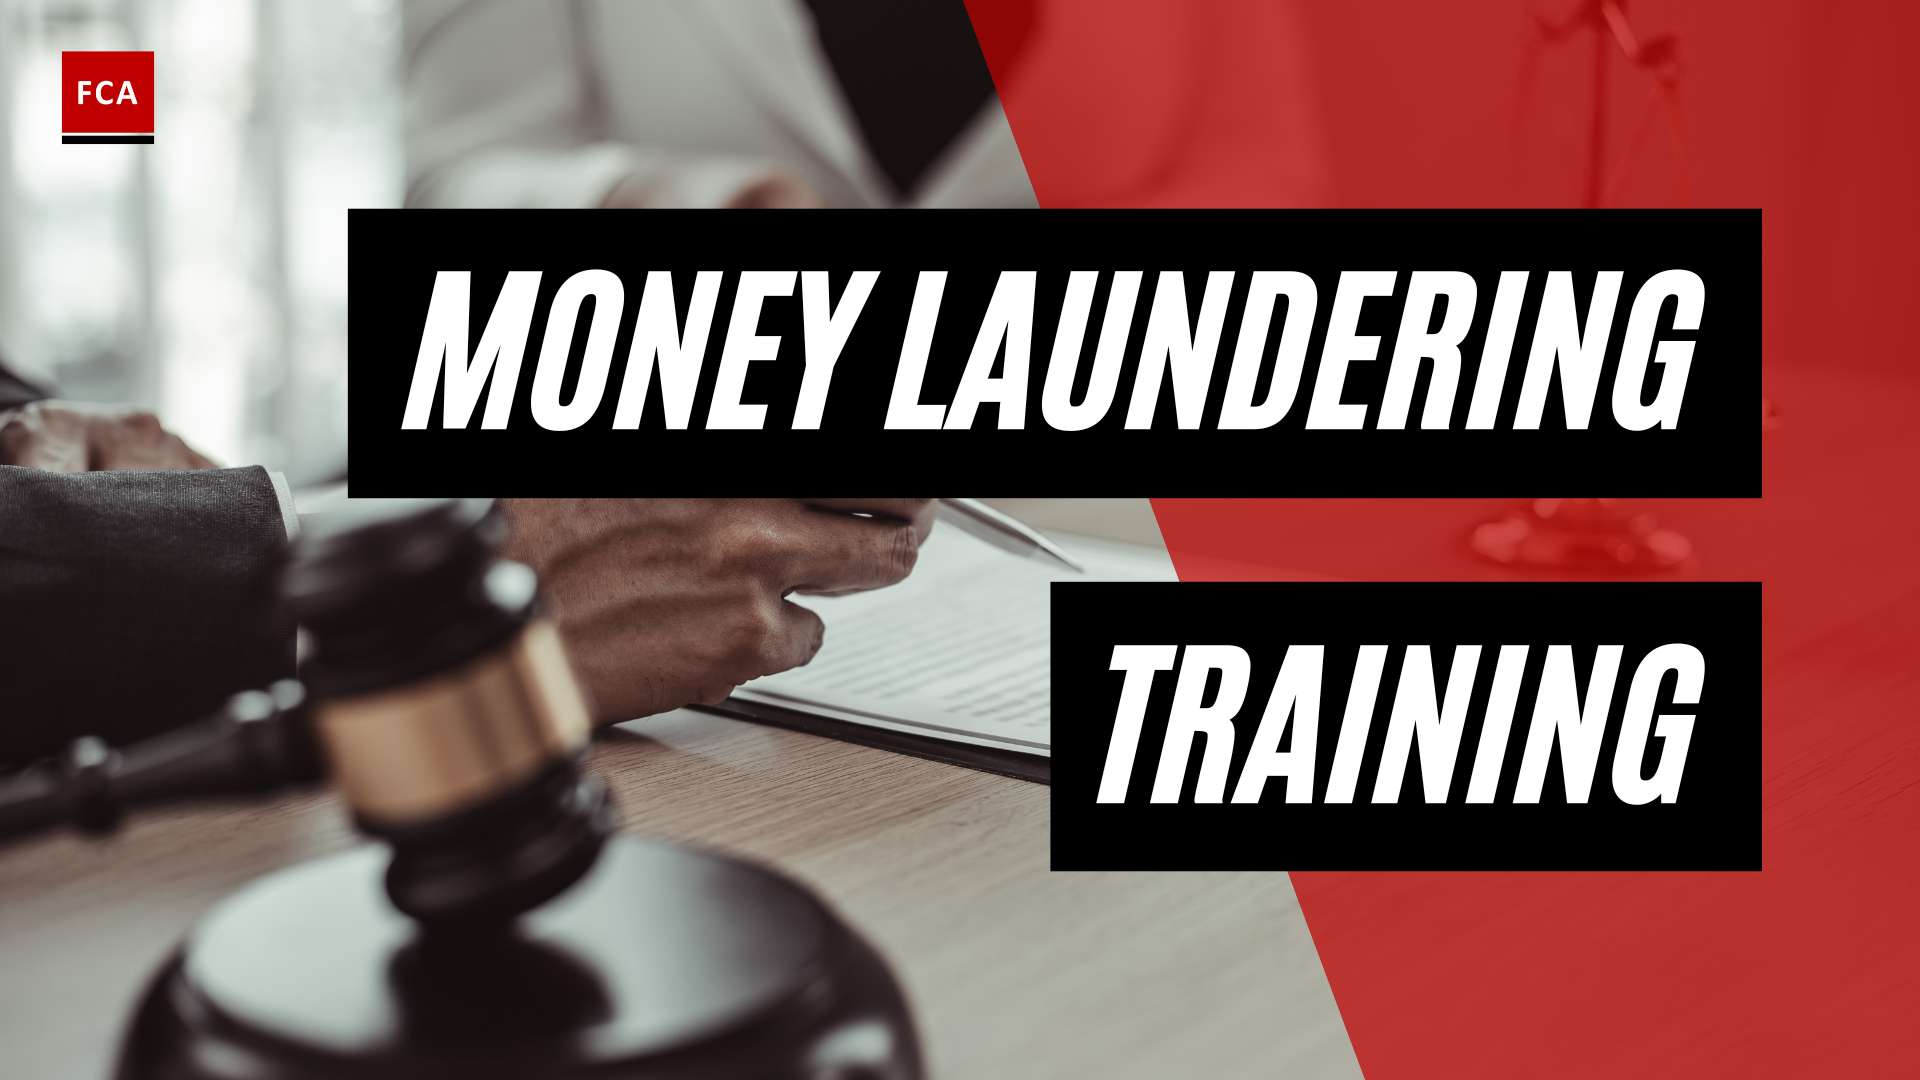 From Awareness To Action: Proactive Money Laundering Training